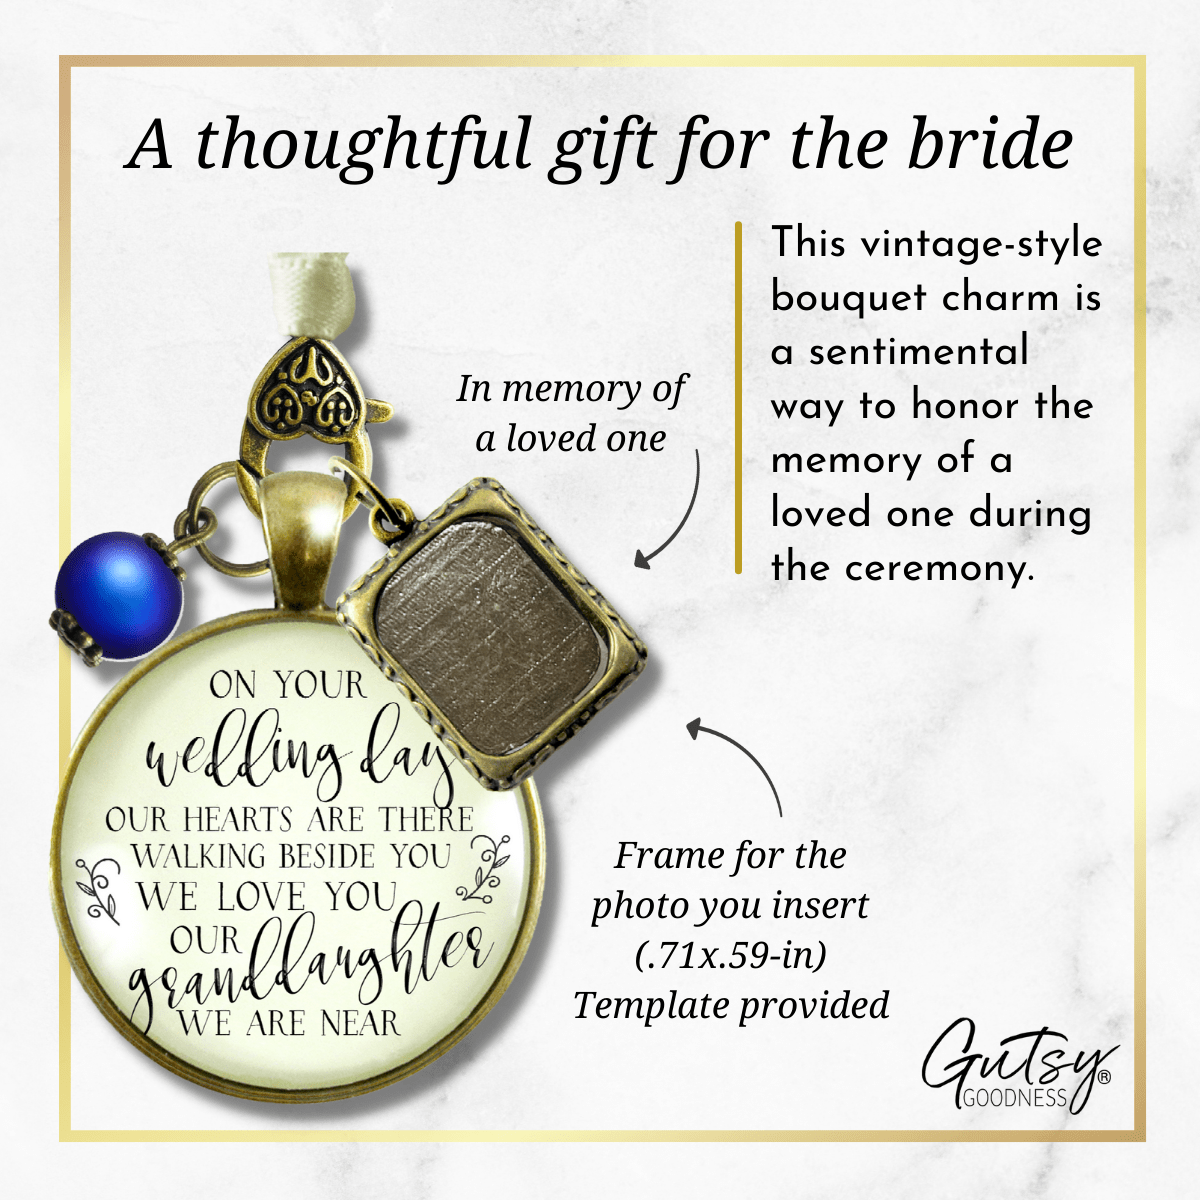 On Your Wedding Day OUR Heart Is There Walking Beside You GRANDDAUGHTER - BRONZE - CREAM - BLUE BEAD